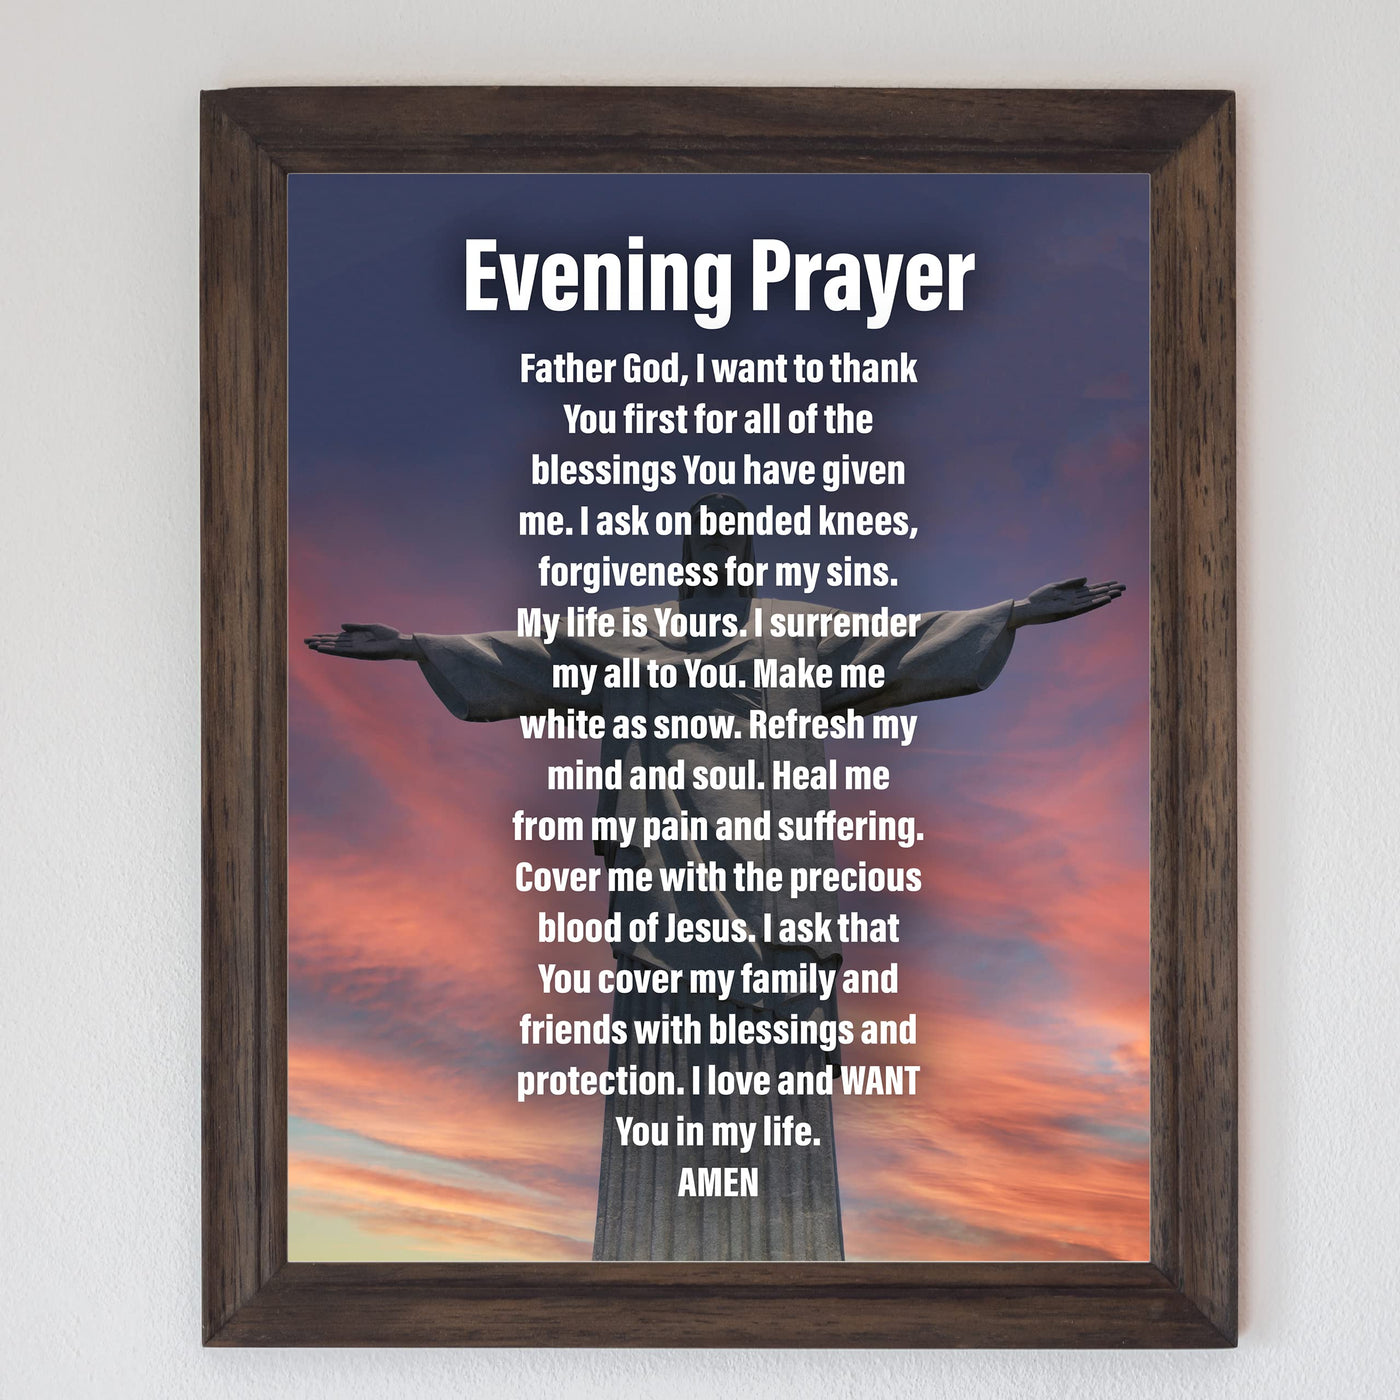 Evening Prayer- Inspirational Christian Wall Art -8 x 10" Motivational Christ the Redeemer Statue Picture Print -Ready to Frame. Home- Church- Office Decor & Religious Gifts. Great Prayer of Faith!